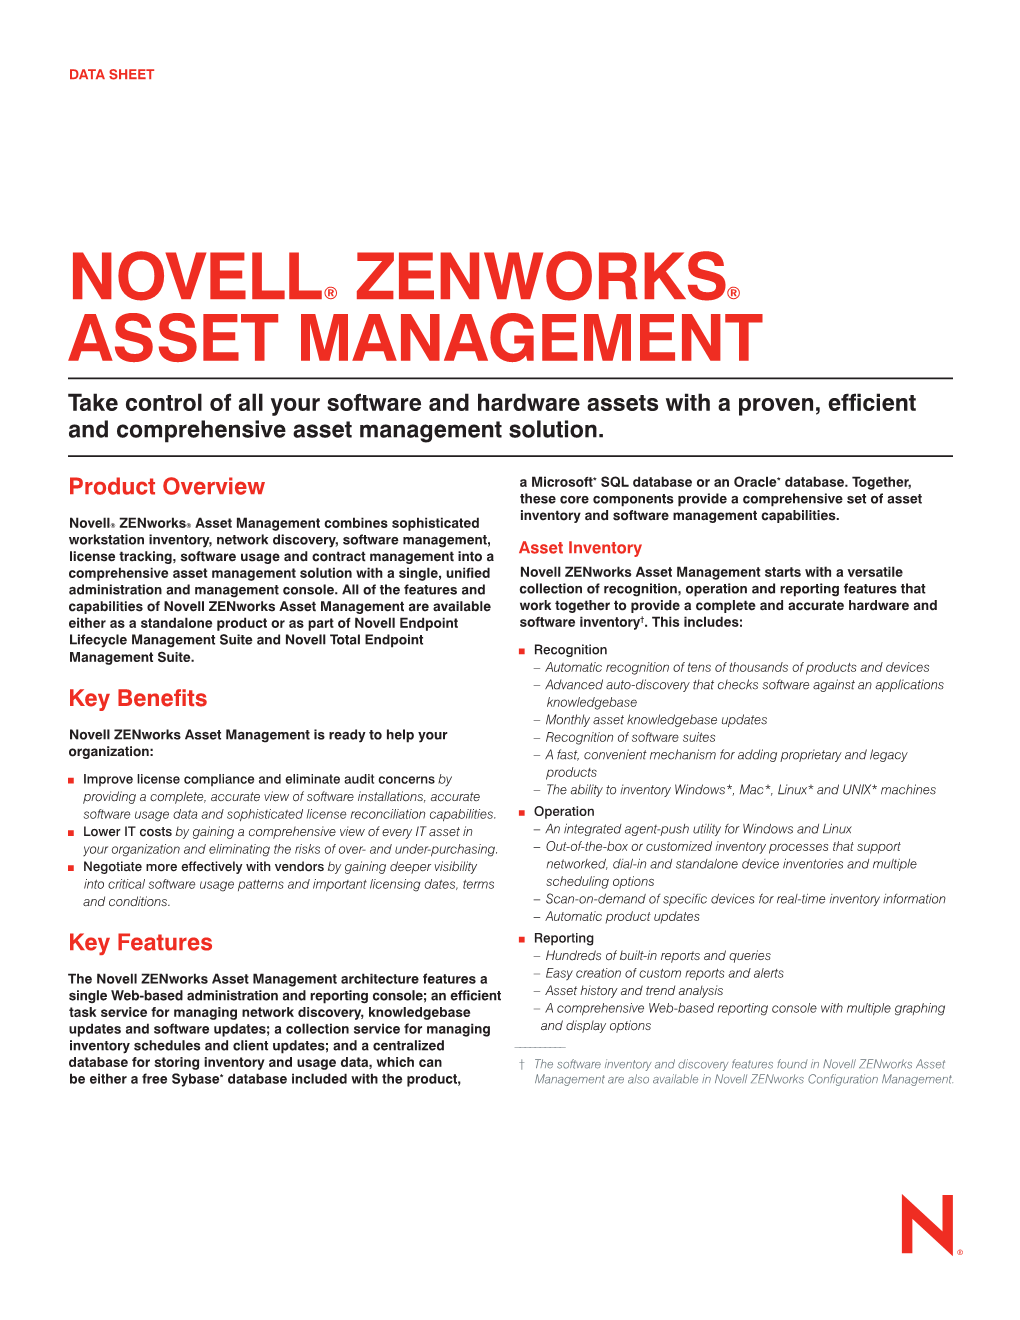 NOVELL® ZENWORKS® ASSET MANAGEMENT Take Control of All Your Software and Hardware Assets with a Proven, Efficient and Comprehensive Asset Management Solution